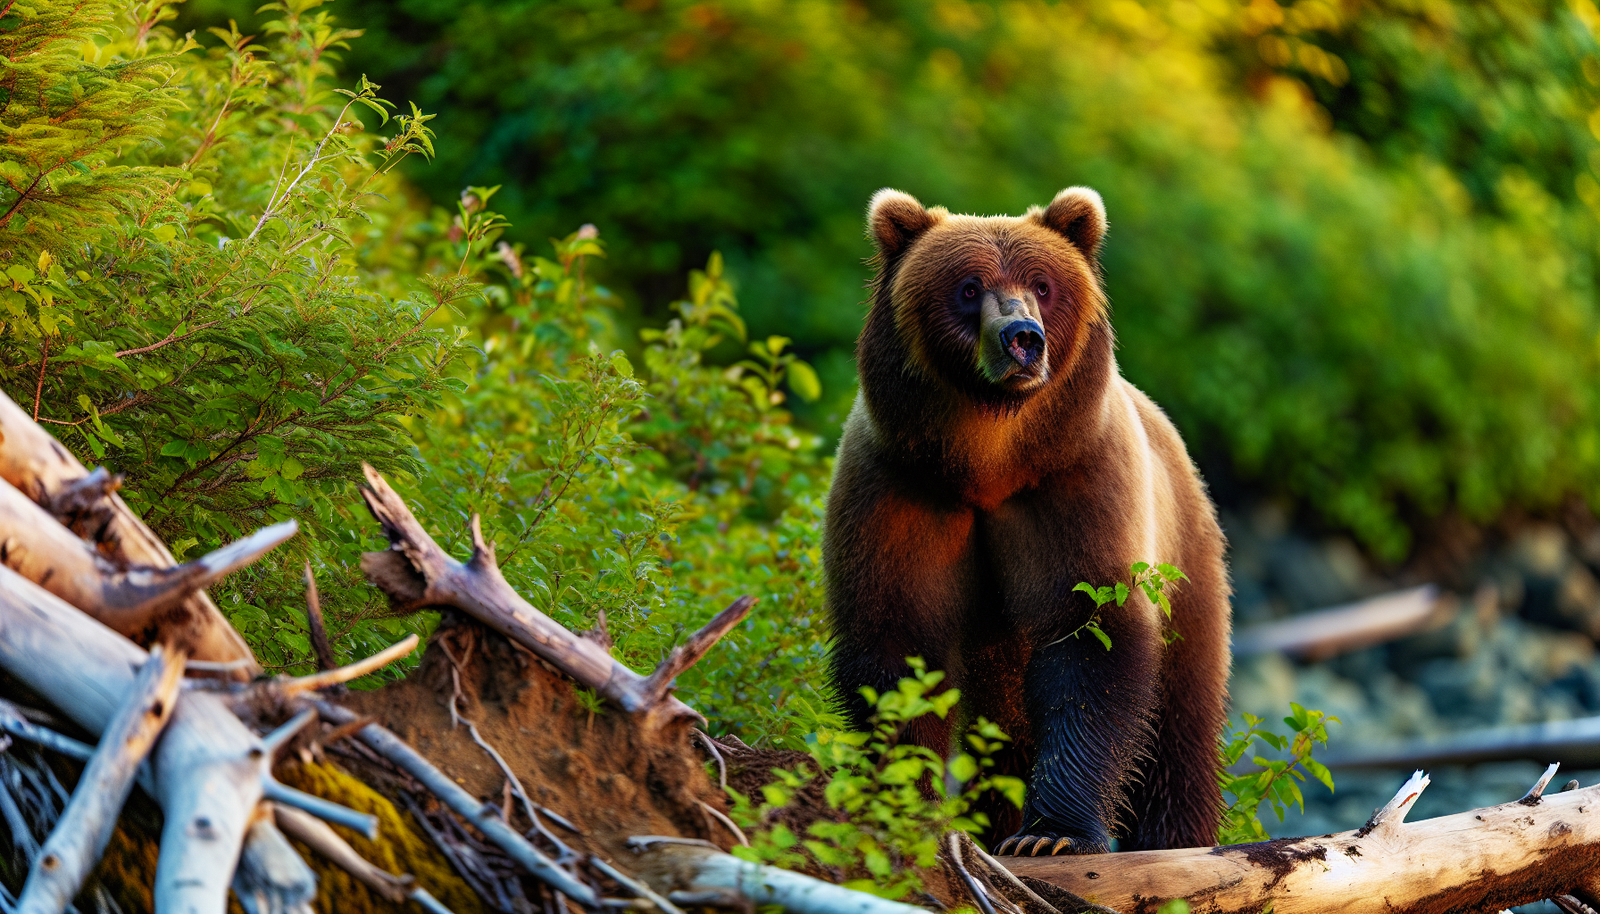 A majestic grizzly bear in its natural habitat in the Great Bear Rainforest